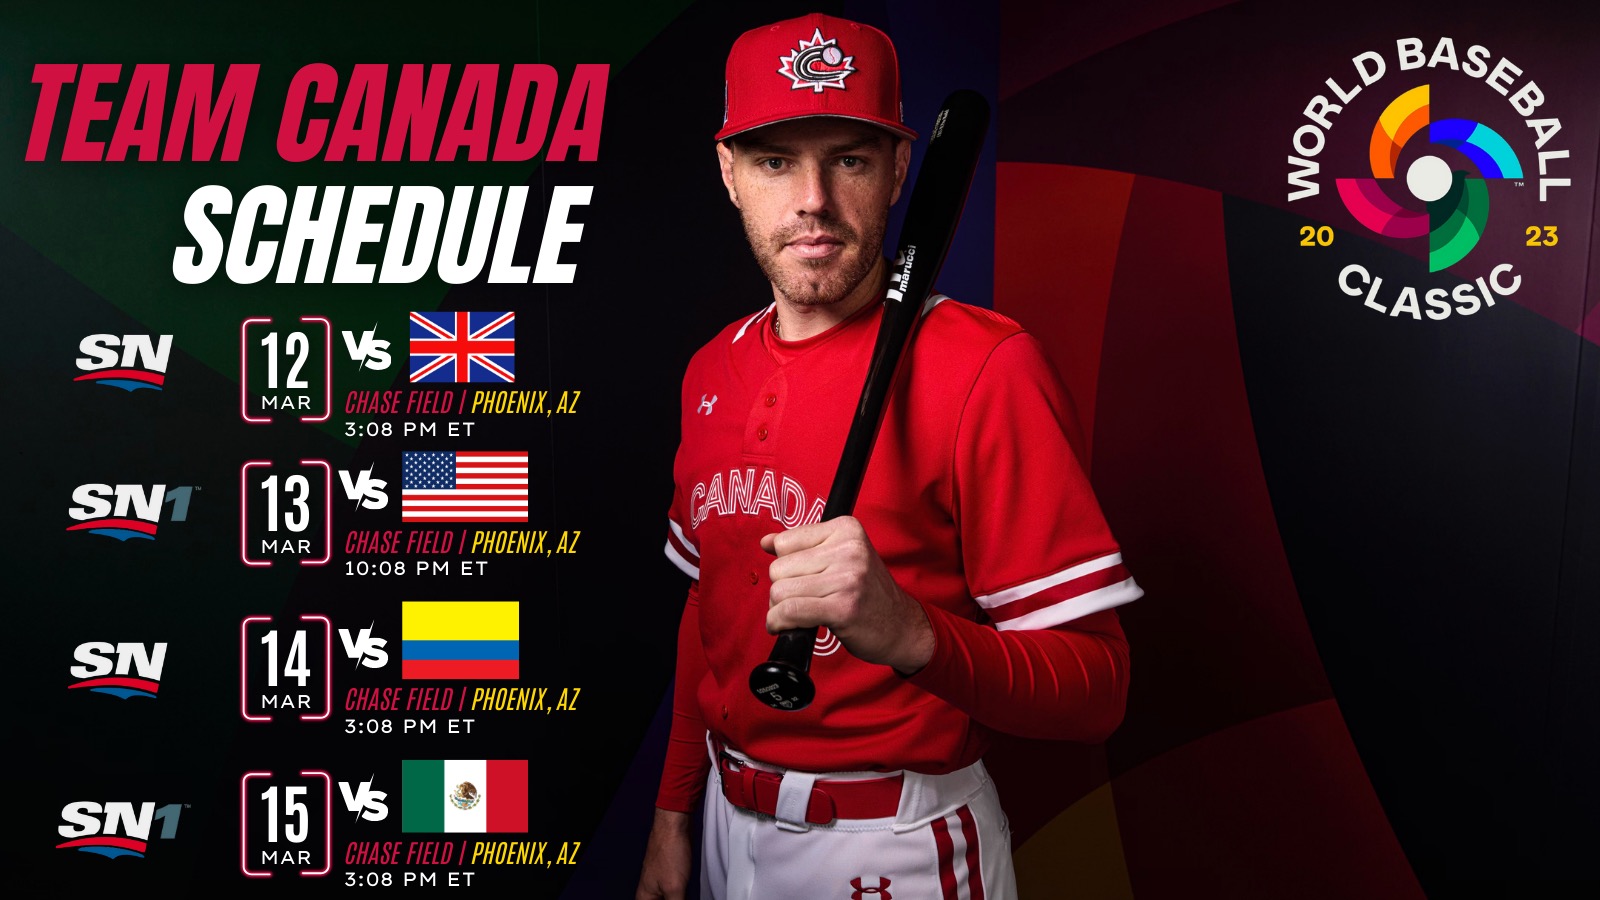 Watch Team Canada at the World Baseball Classic!